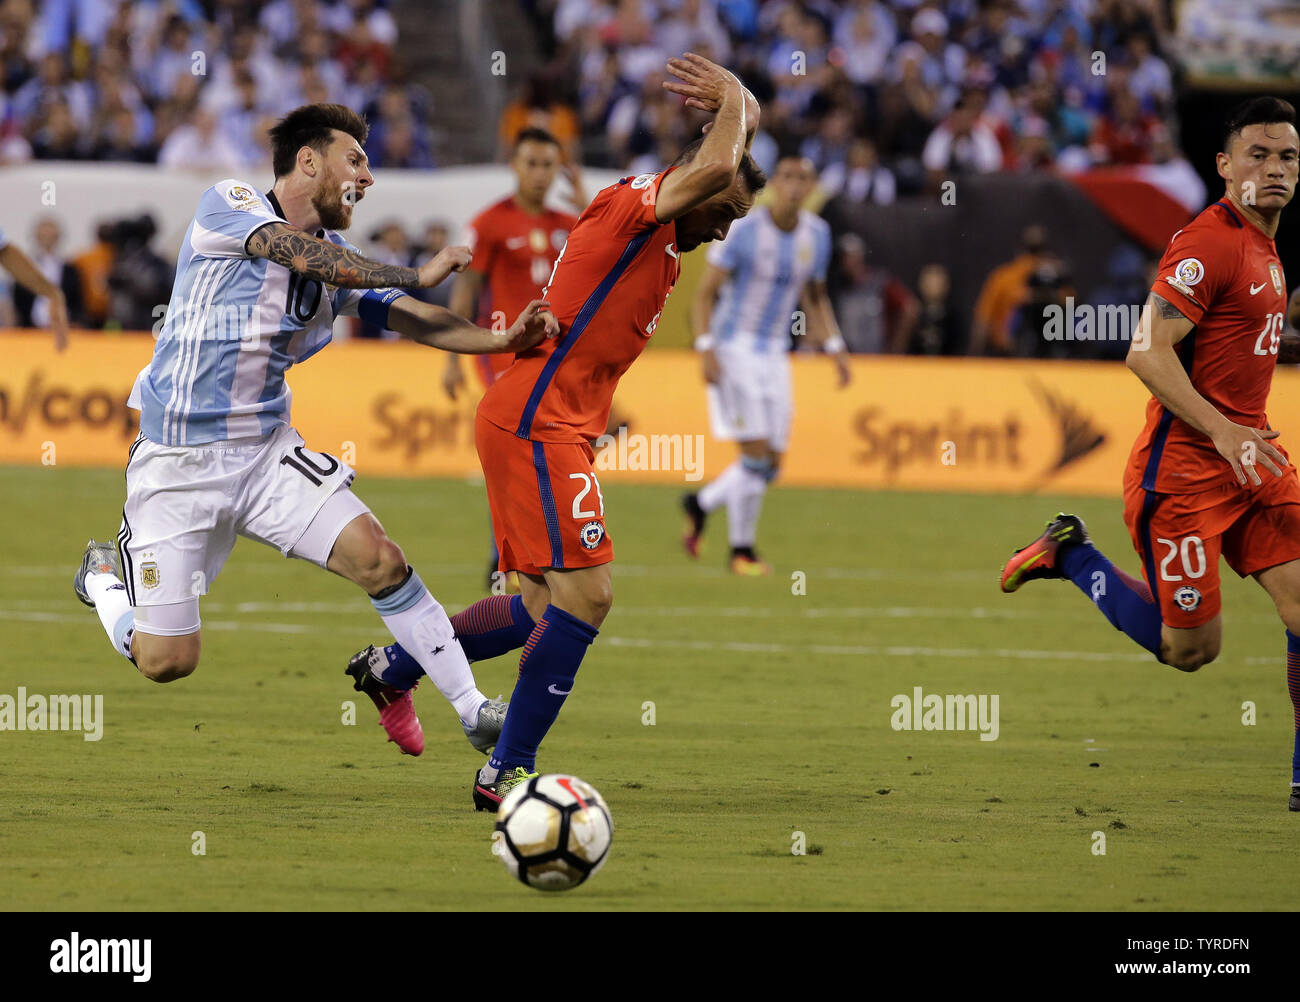 Argentina midfielder Lionel Messi (10) is fouled by Chile midfielder Marcelo Diaz (21) who draws his second yellow card and is ejected from the game as a result in the first half at the Copa America Centenario USA 2016 Finals at MetLife Stadium in East Rutherford, New Jersey, on June 26, 2016.      Photo by Ray Stubblebine/UPI Stock Photo